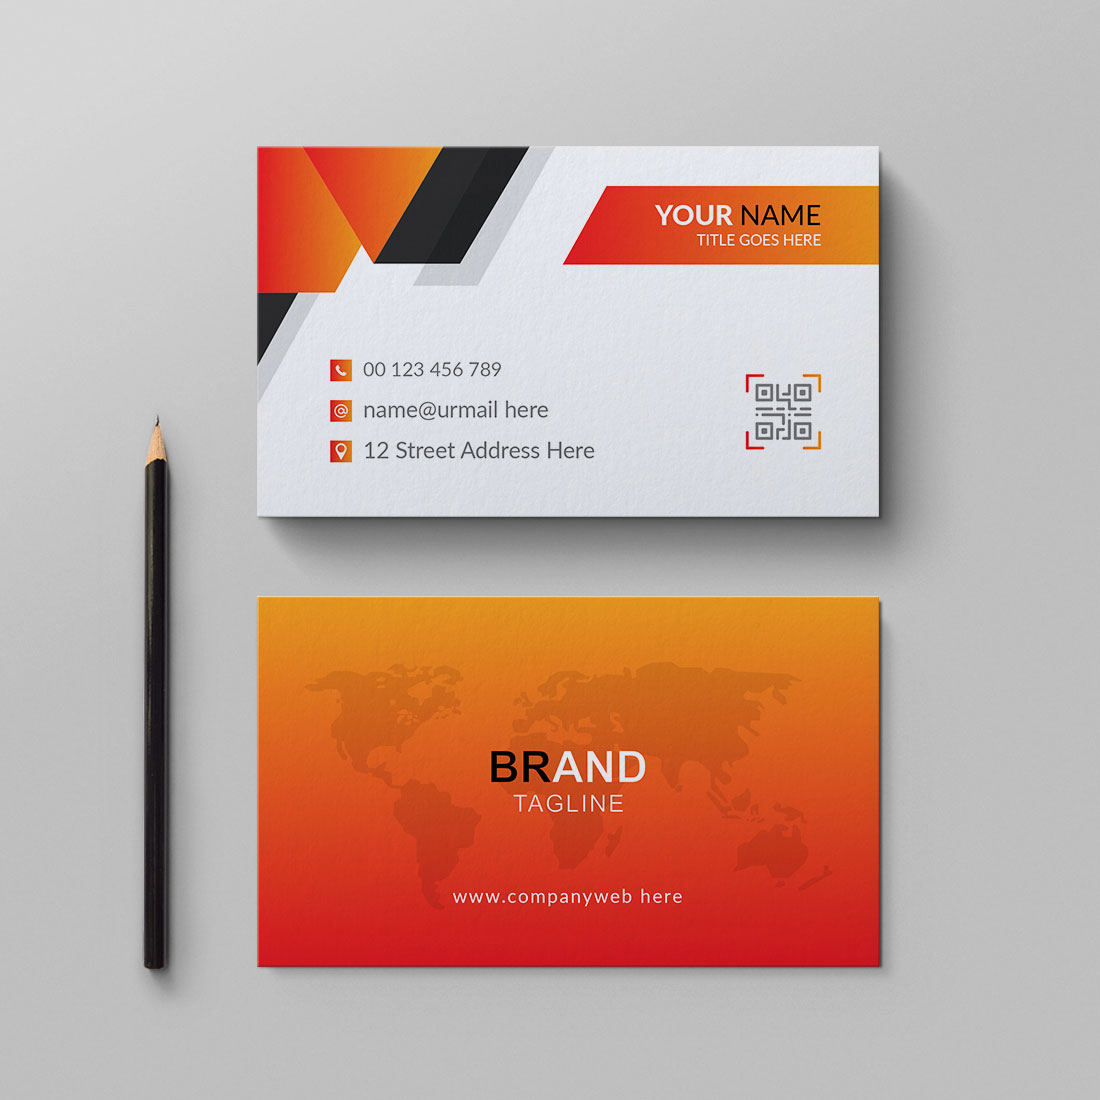 Clean business card design template cover image.